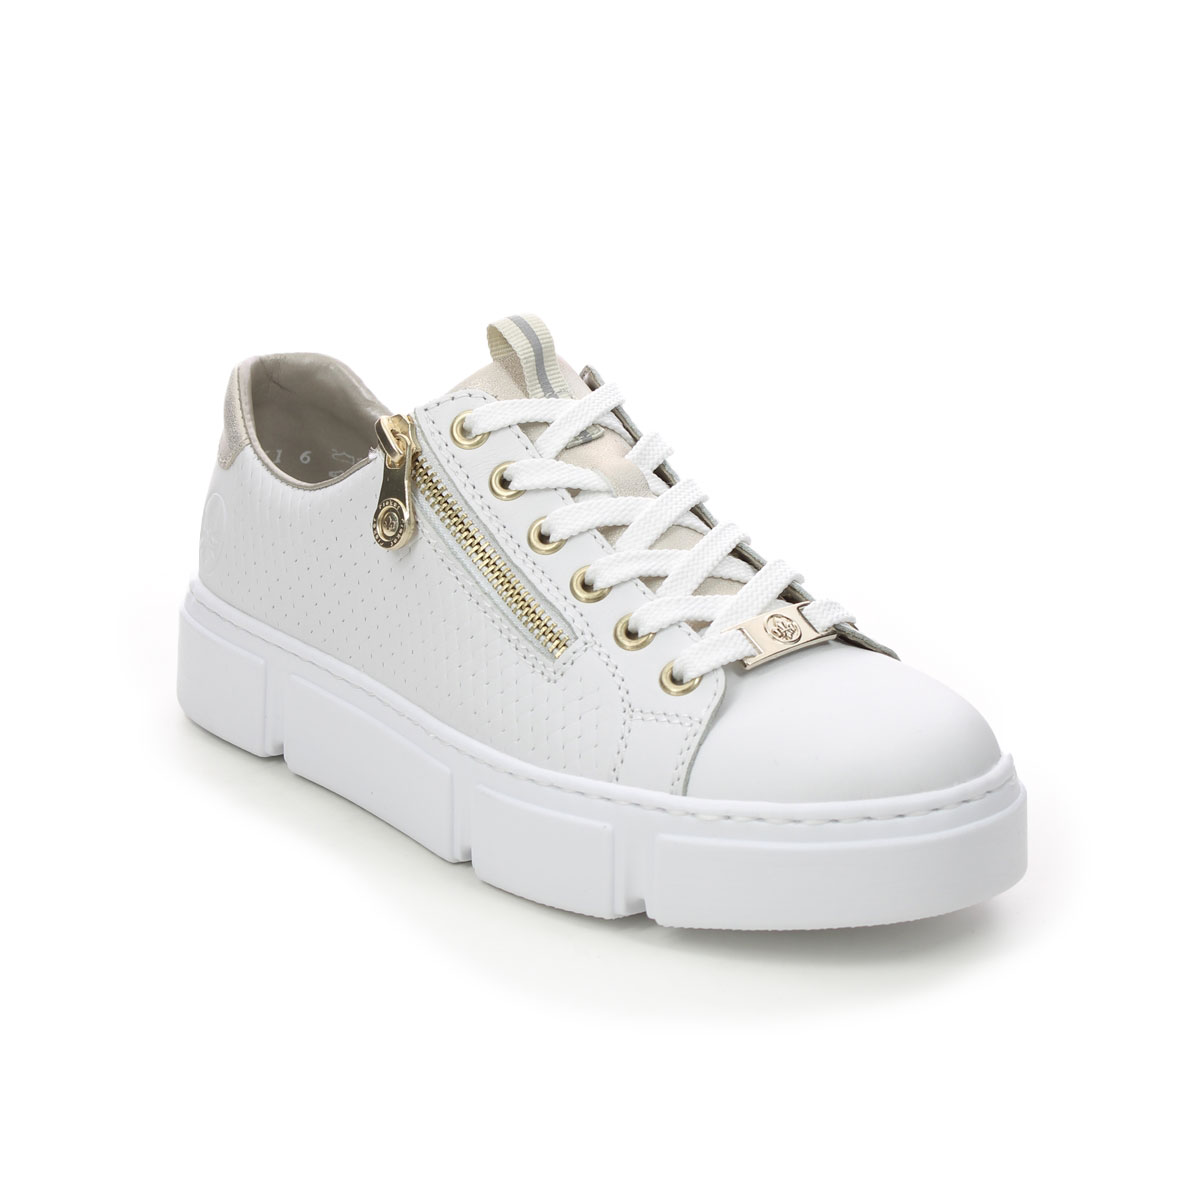 Rieker N5932-80 WHITE LEATHER Womens trainers